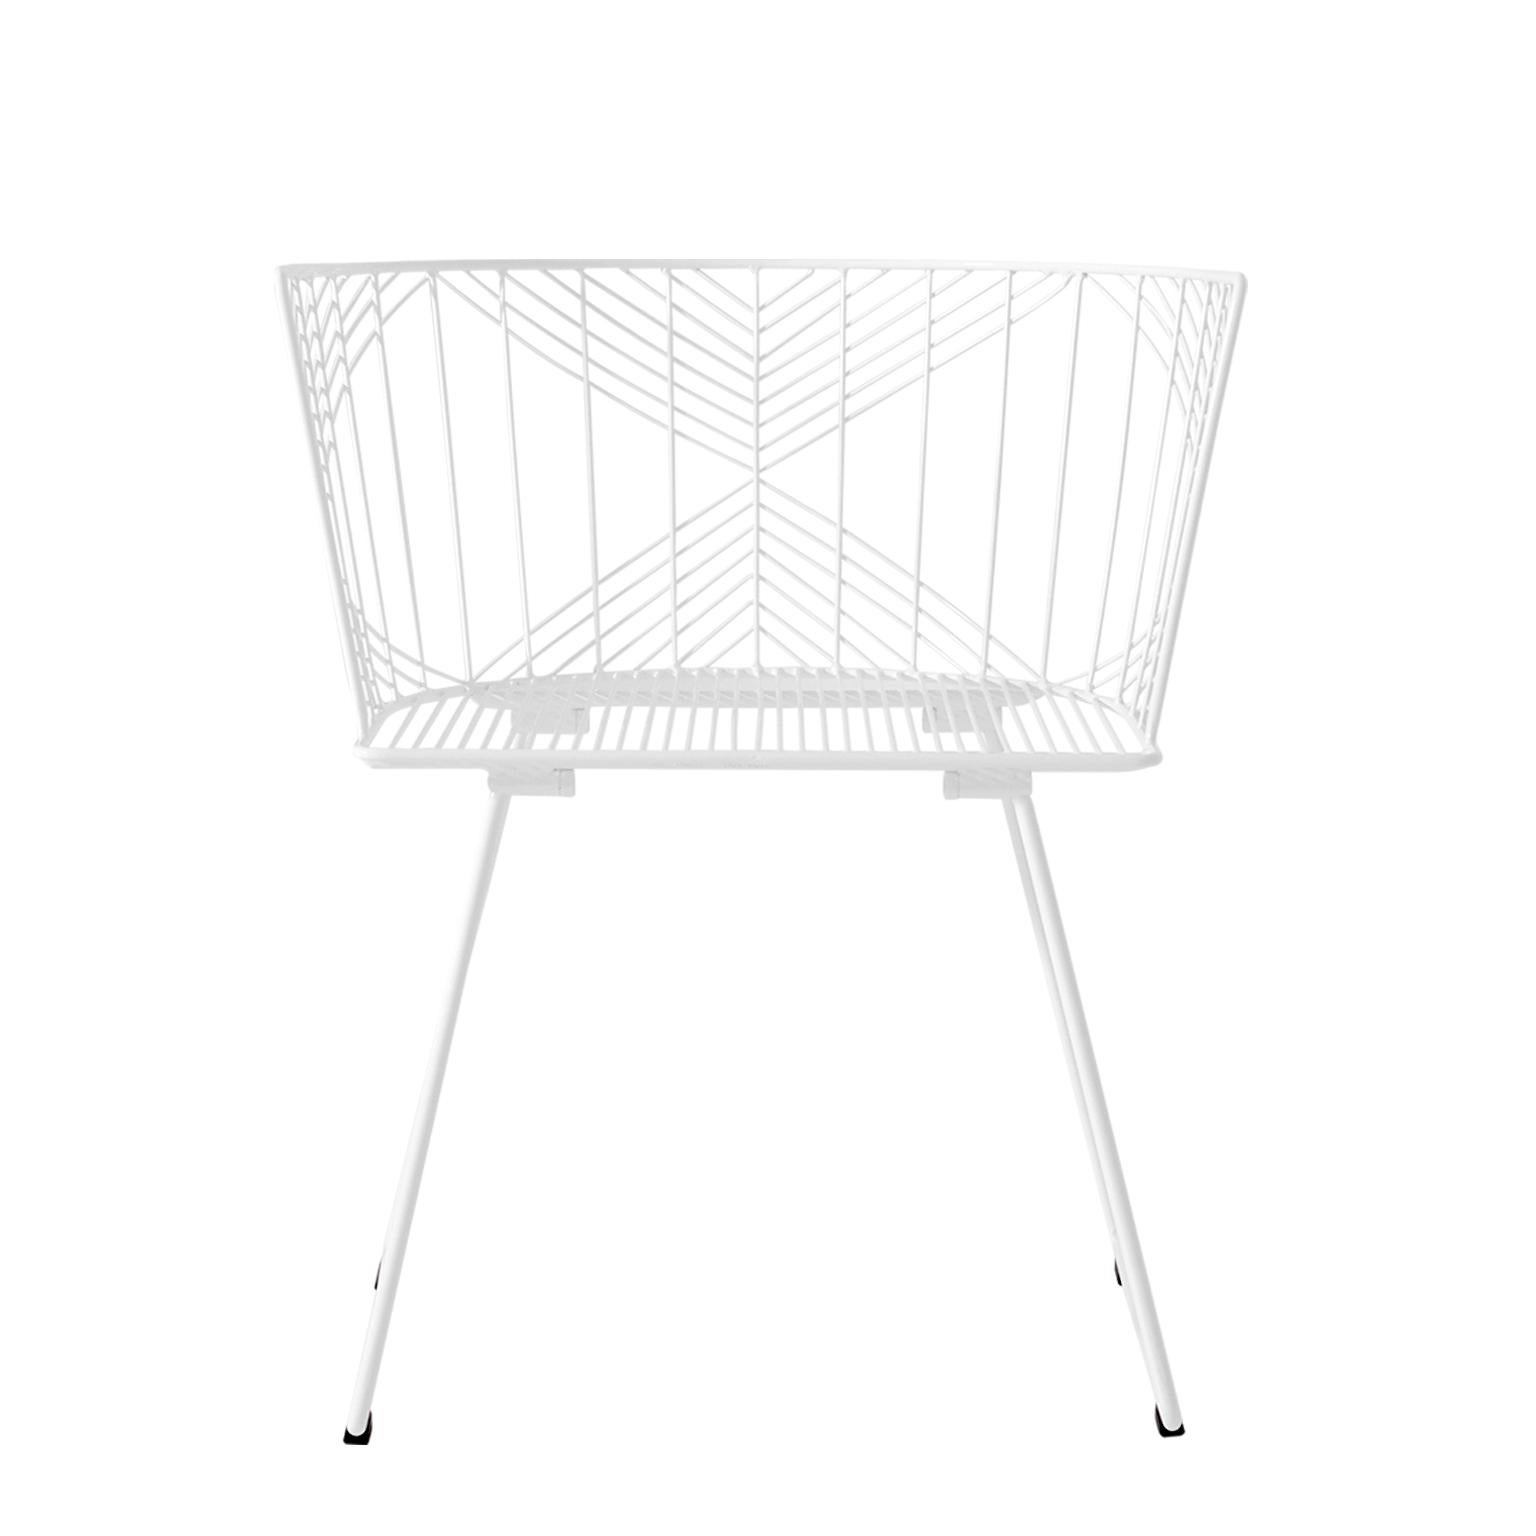 Bend Goods wire furniture
A Bend Goods original design, the Captain chair is truly one of a kind. It has a generous seat for better maneuverability, making this the ideal wire chair for any dining experiences full of entertainment. The Captain